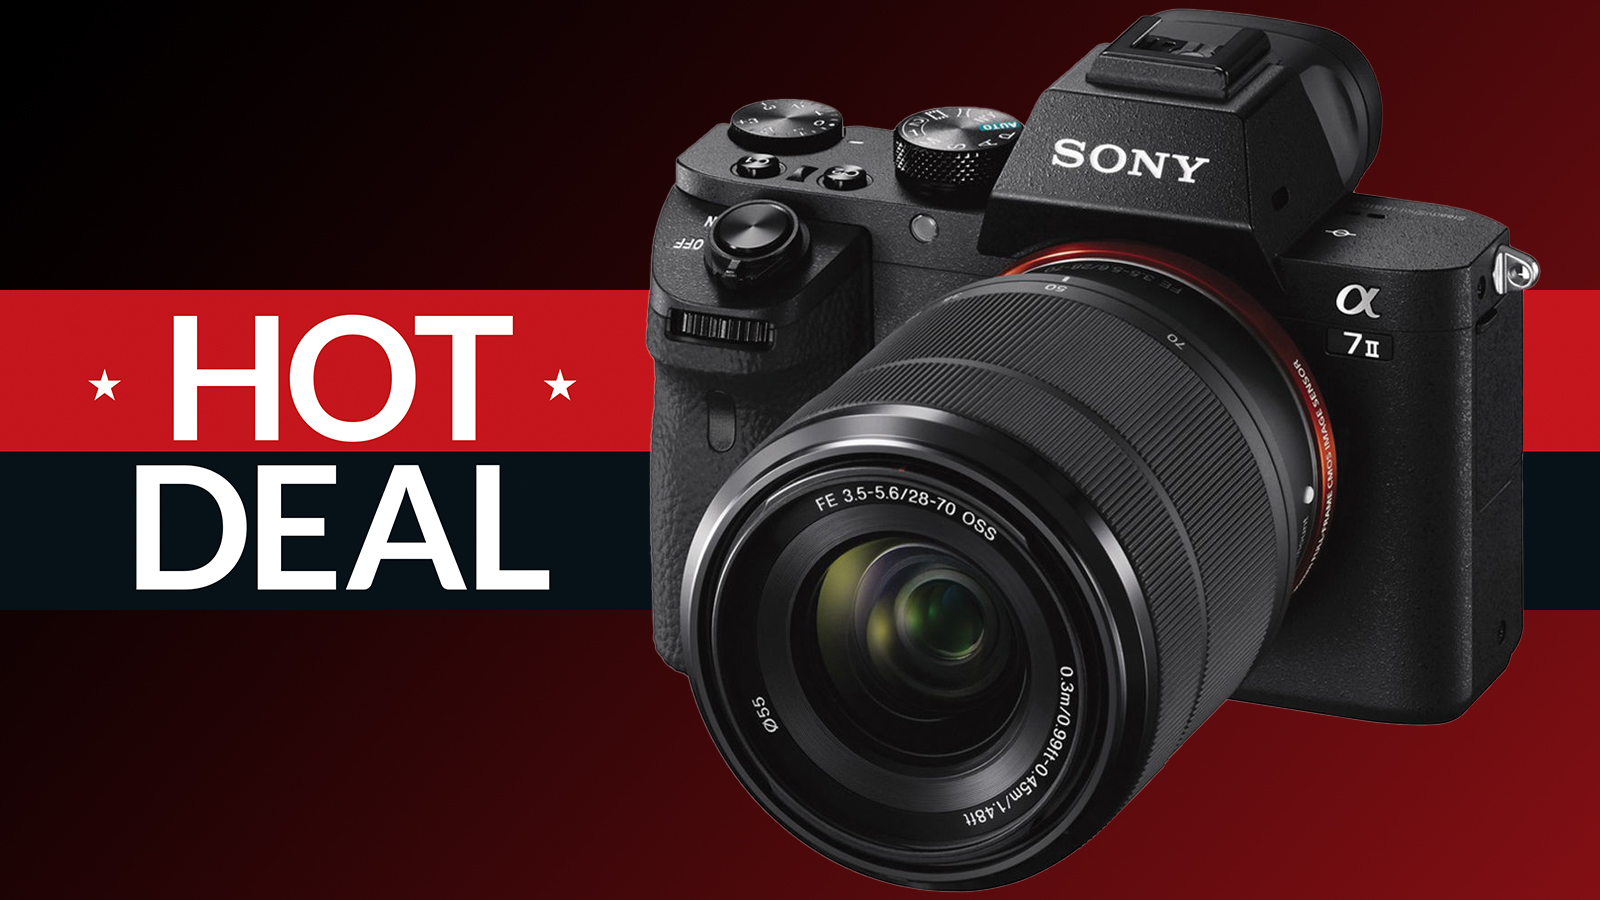 Sony A7 III now $500 off in this Black Friday camera deal